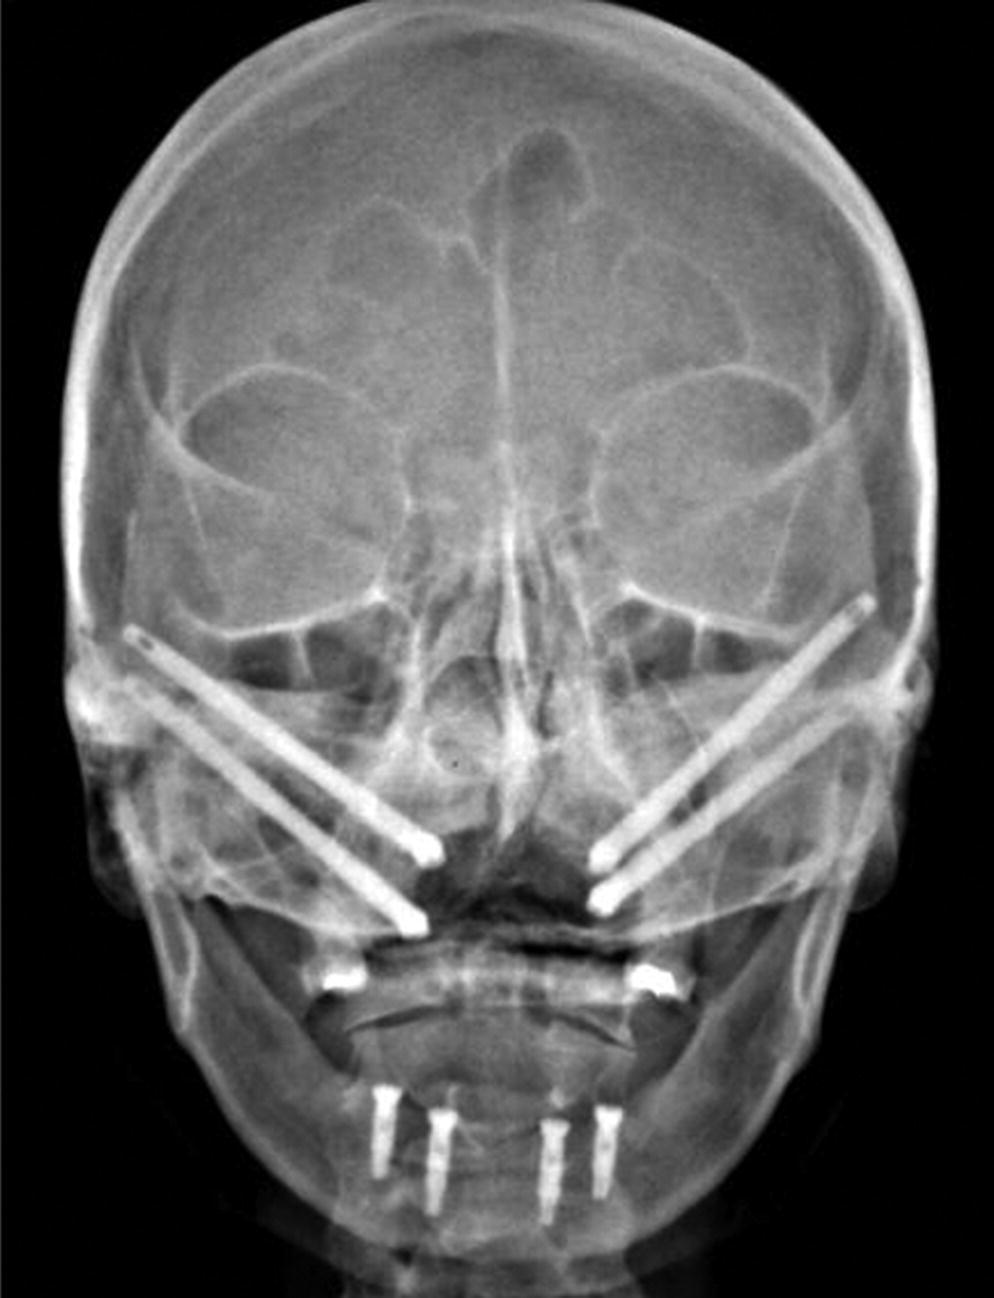 Radiograph displaying two implants placed into each zygoma.